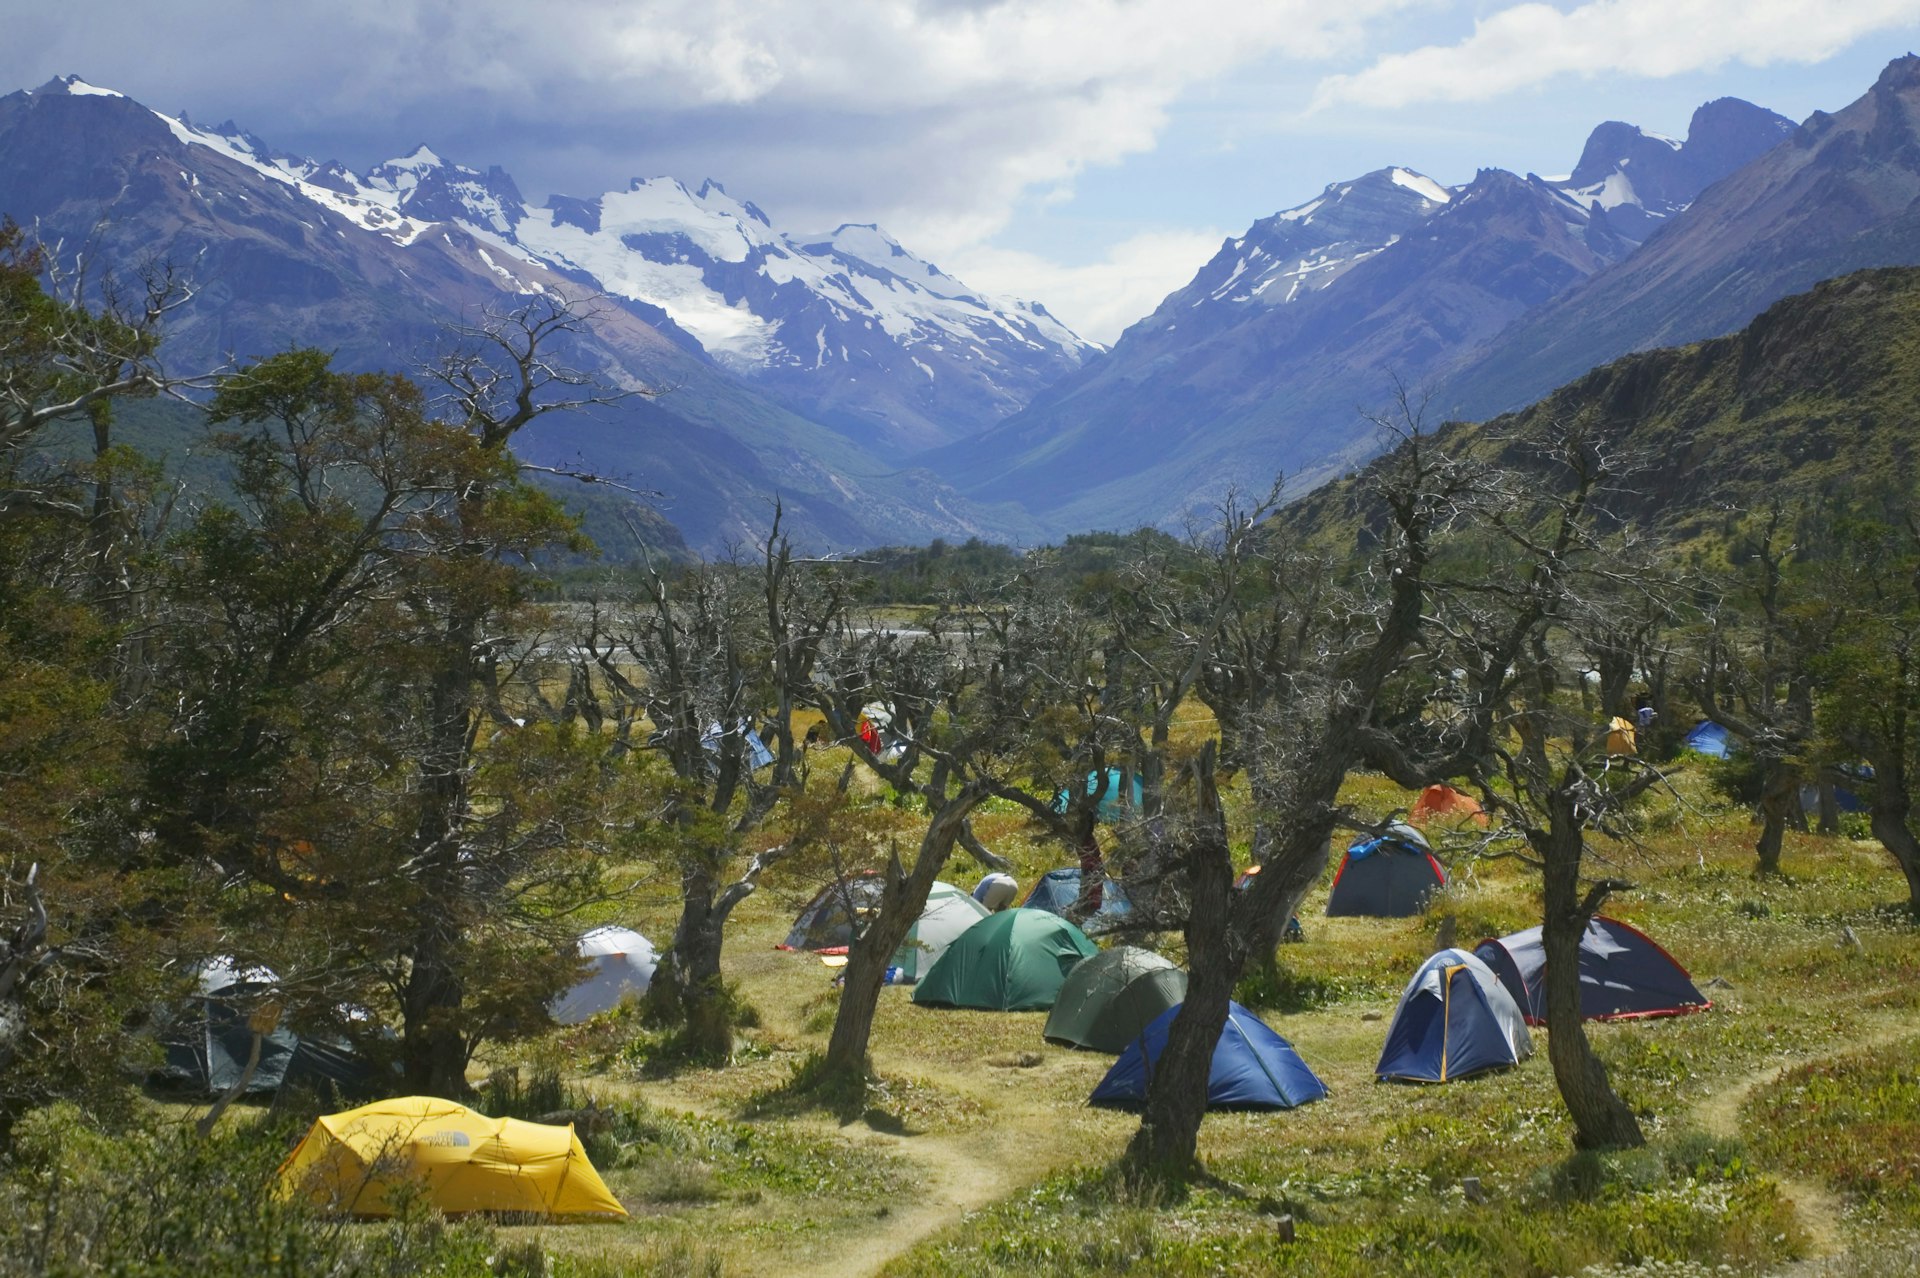 Tents are set up under a grove of trees at the base of mountains in Argentina